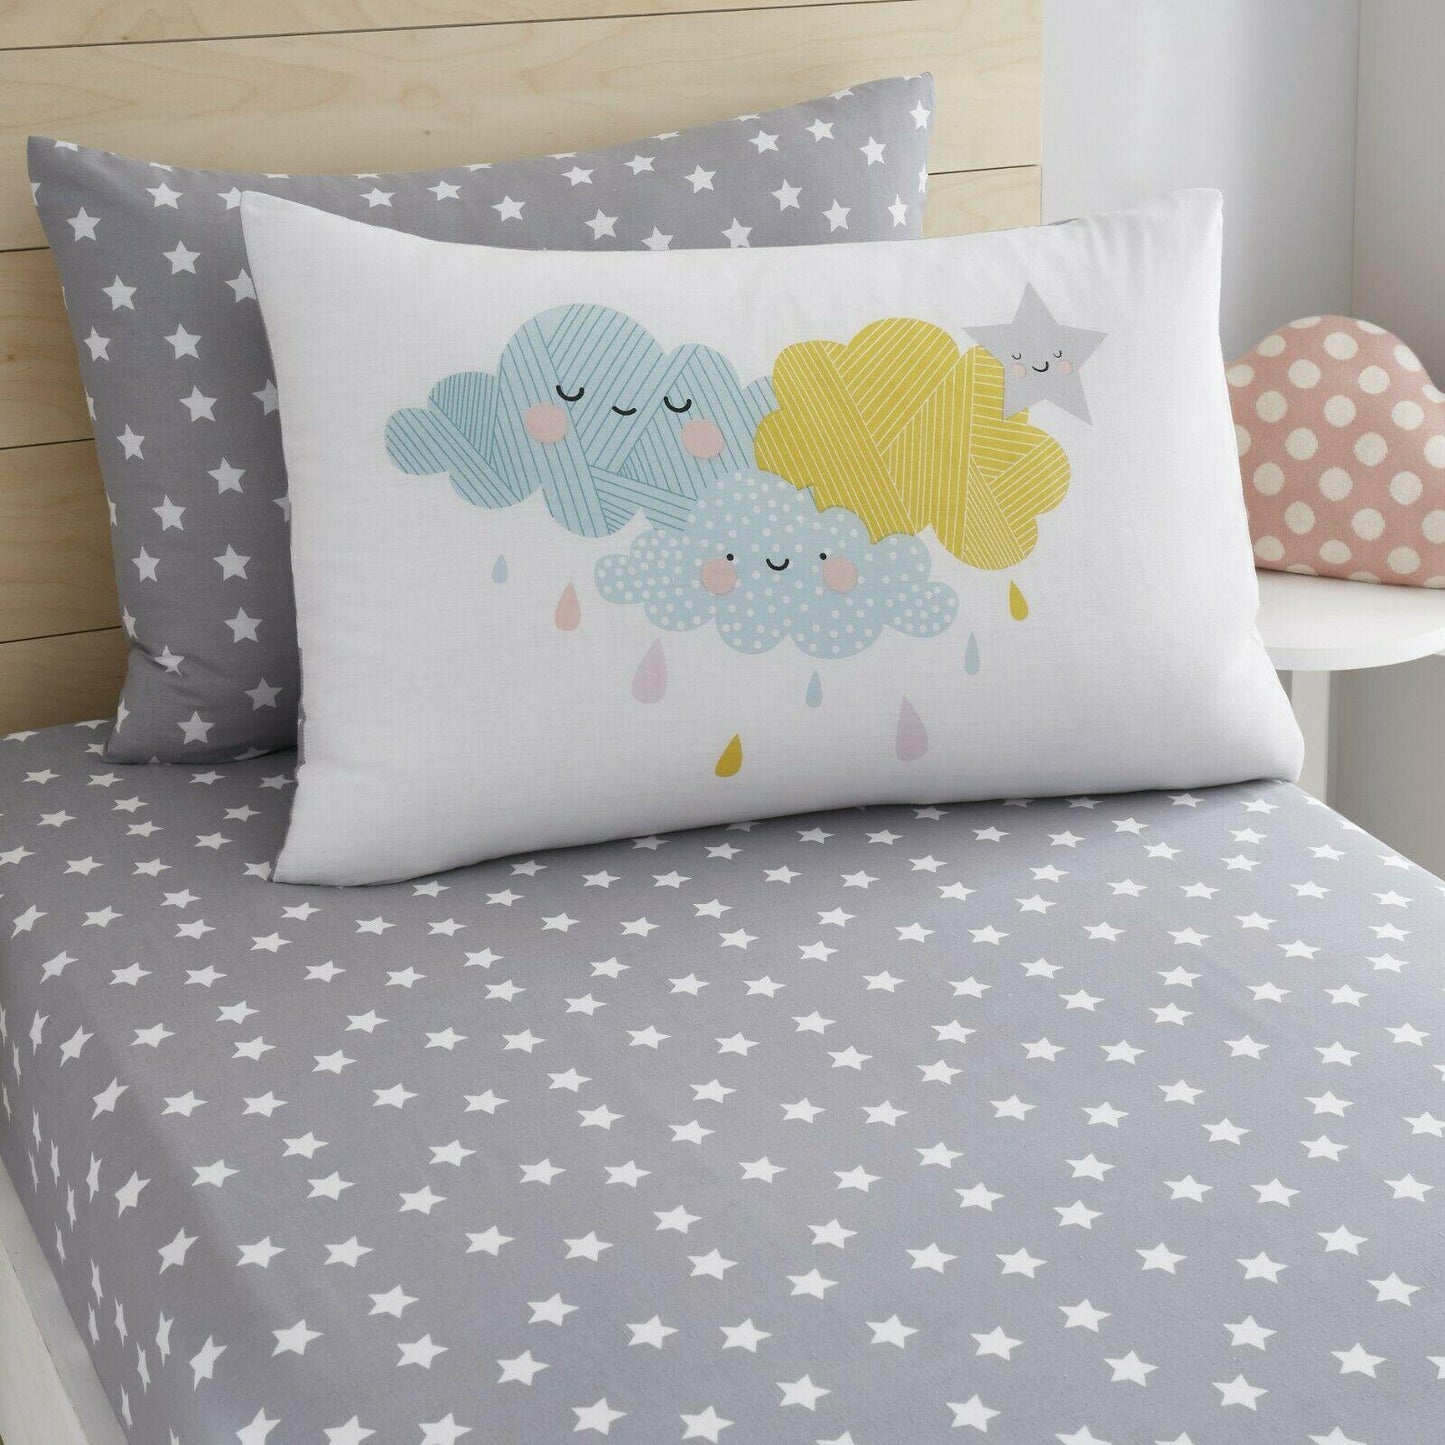 White Happy Clouds Print Kids Bedding Duvet Set Fitted Sheets